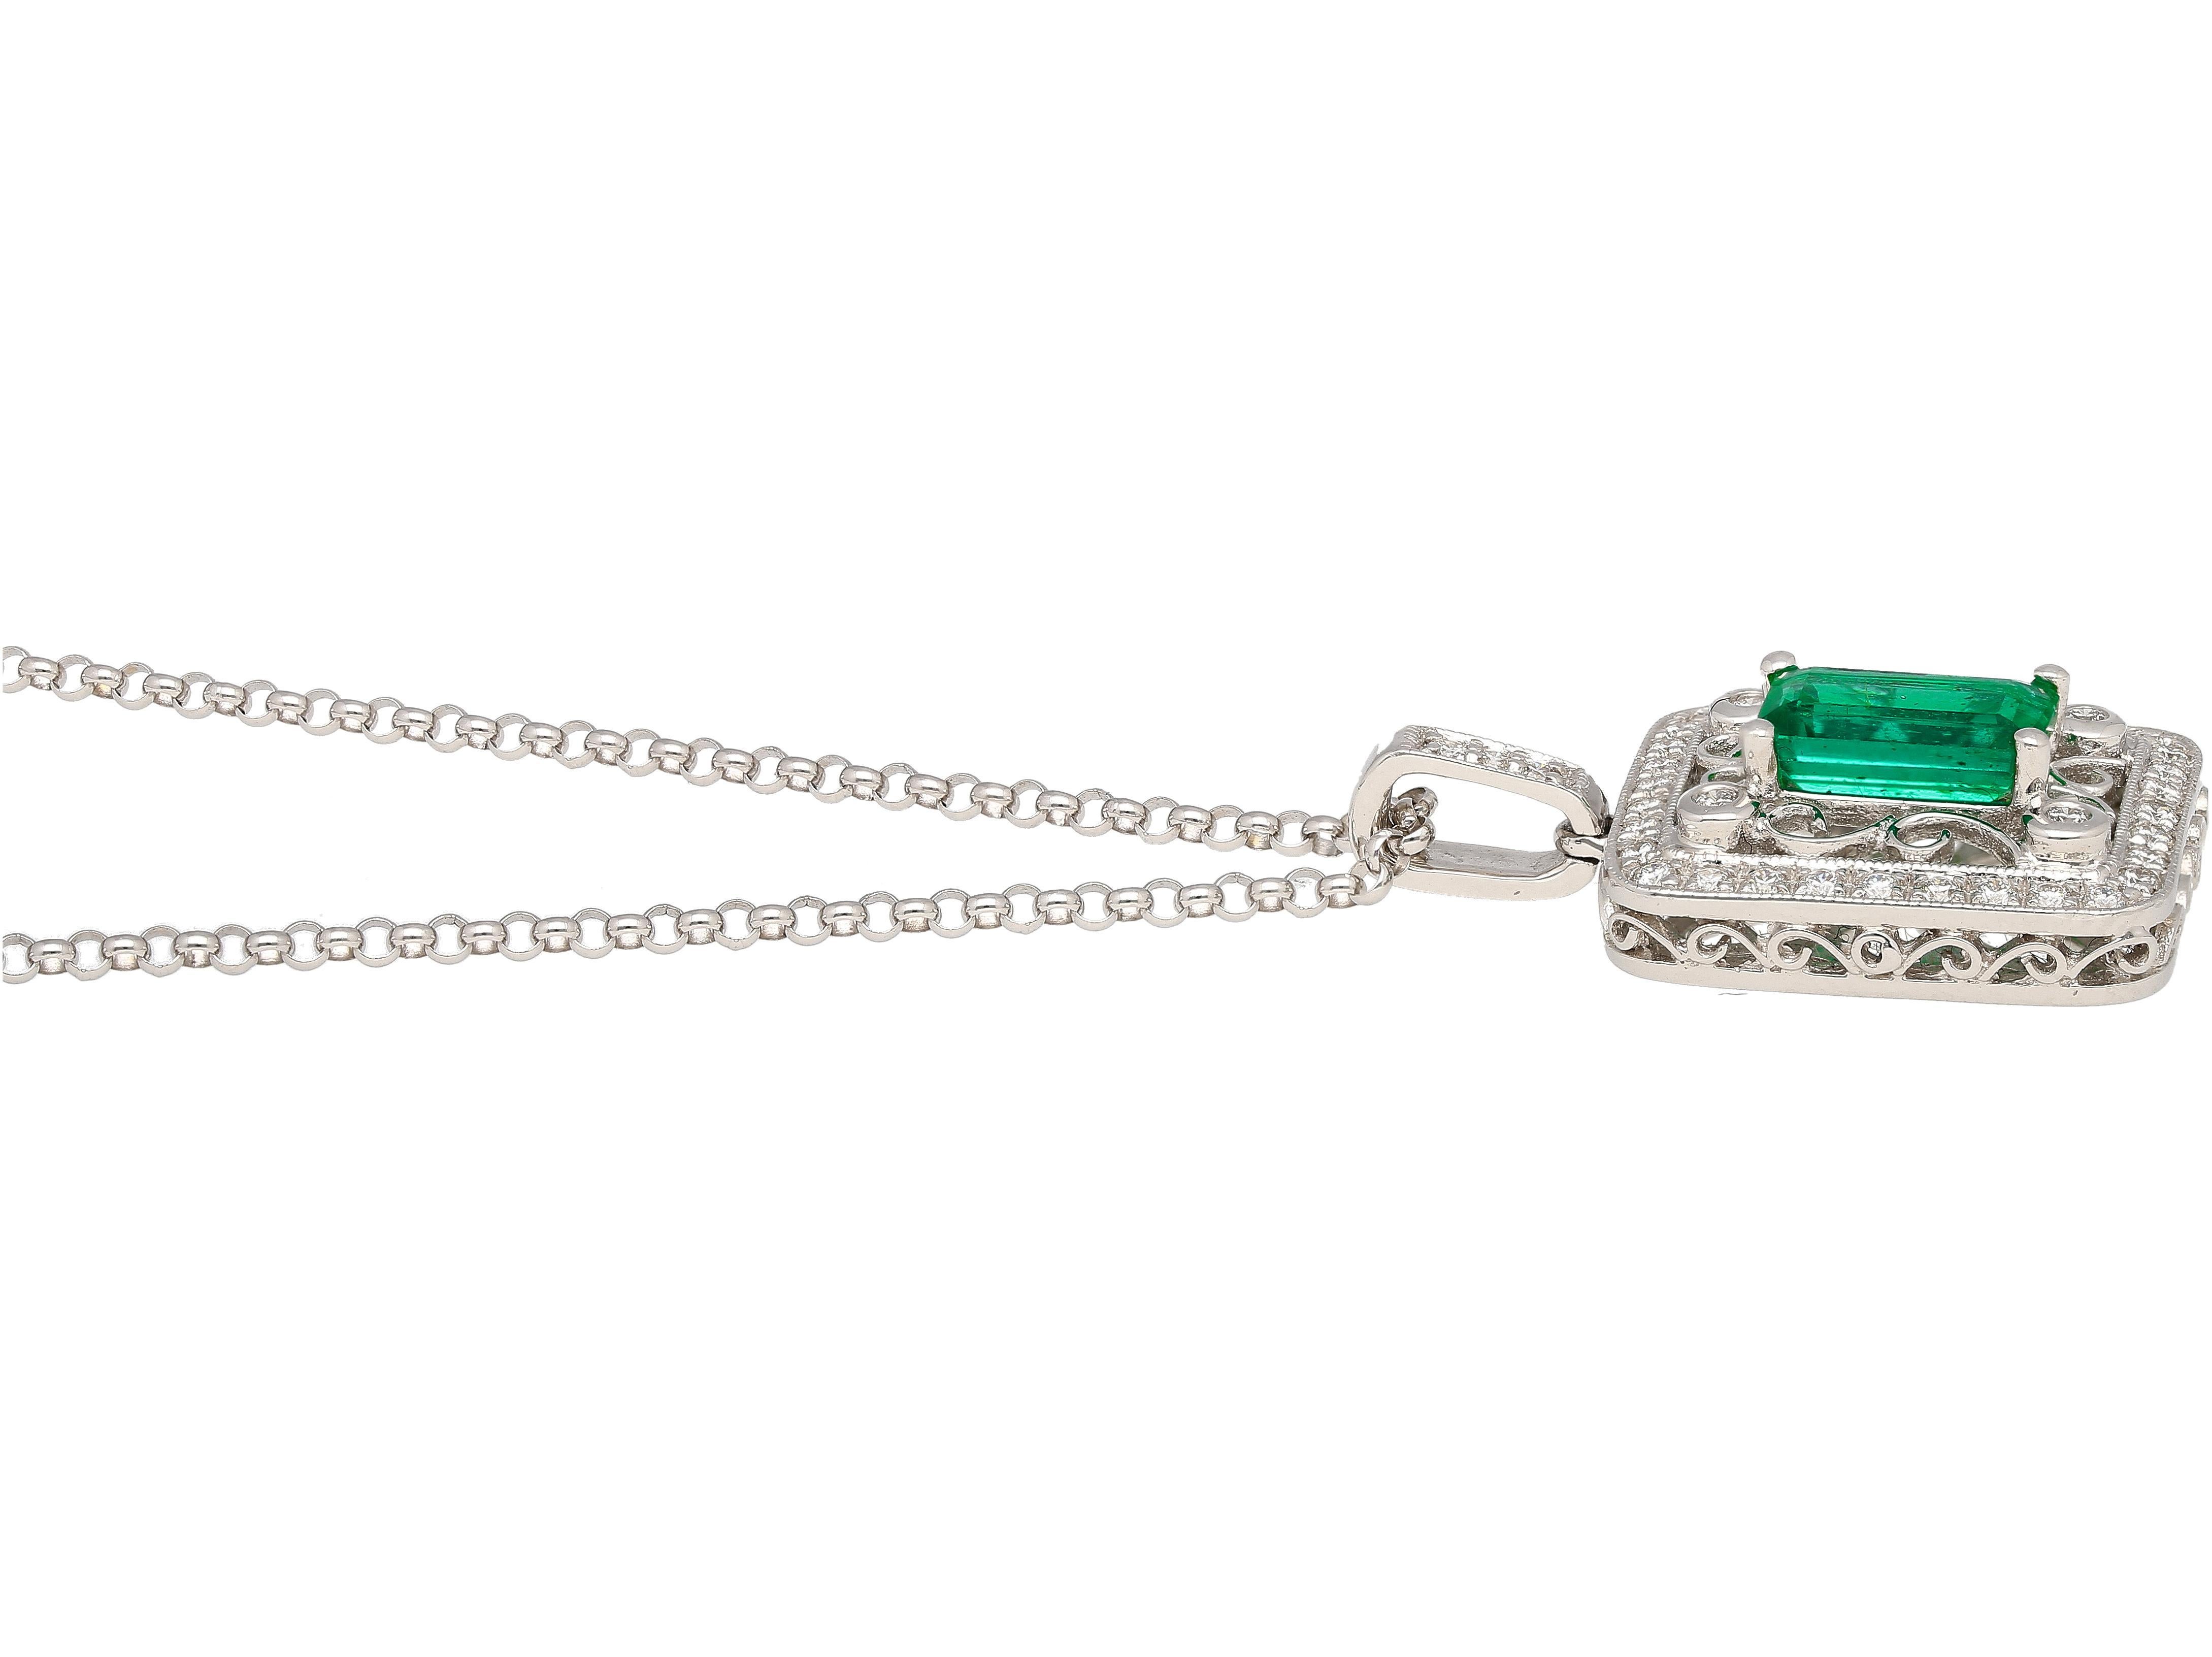 GIA Certified 1.39 Carat Zambian Emerald and Diamond Floral Box Pendant Necklace For Sale 5